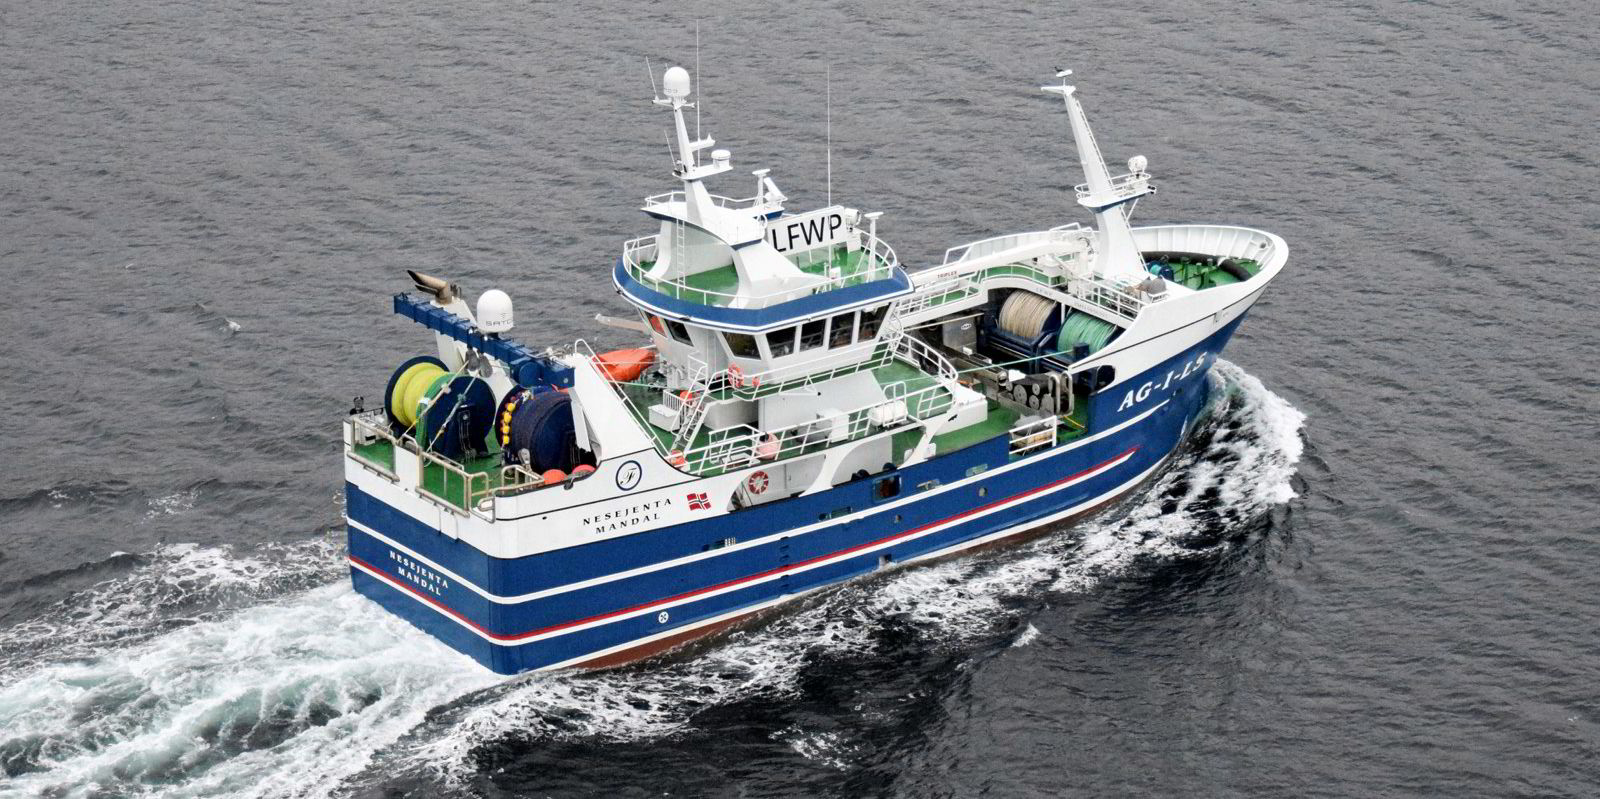 M/S Nesejenta a commercial gillnetter / Danish seiner was chartered for the experiments